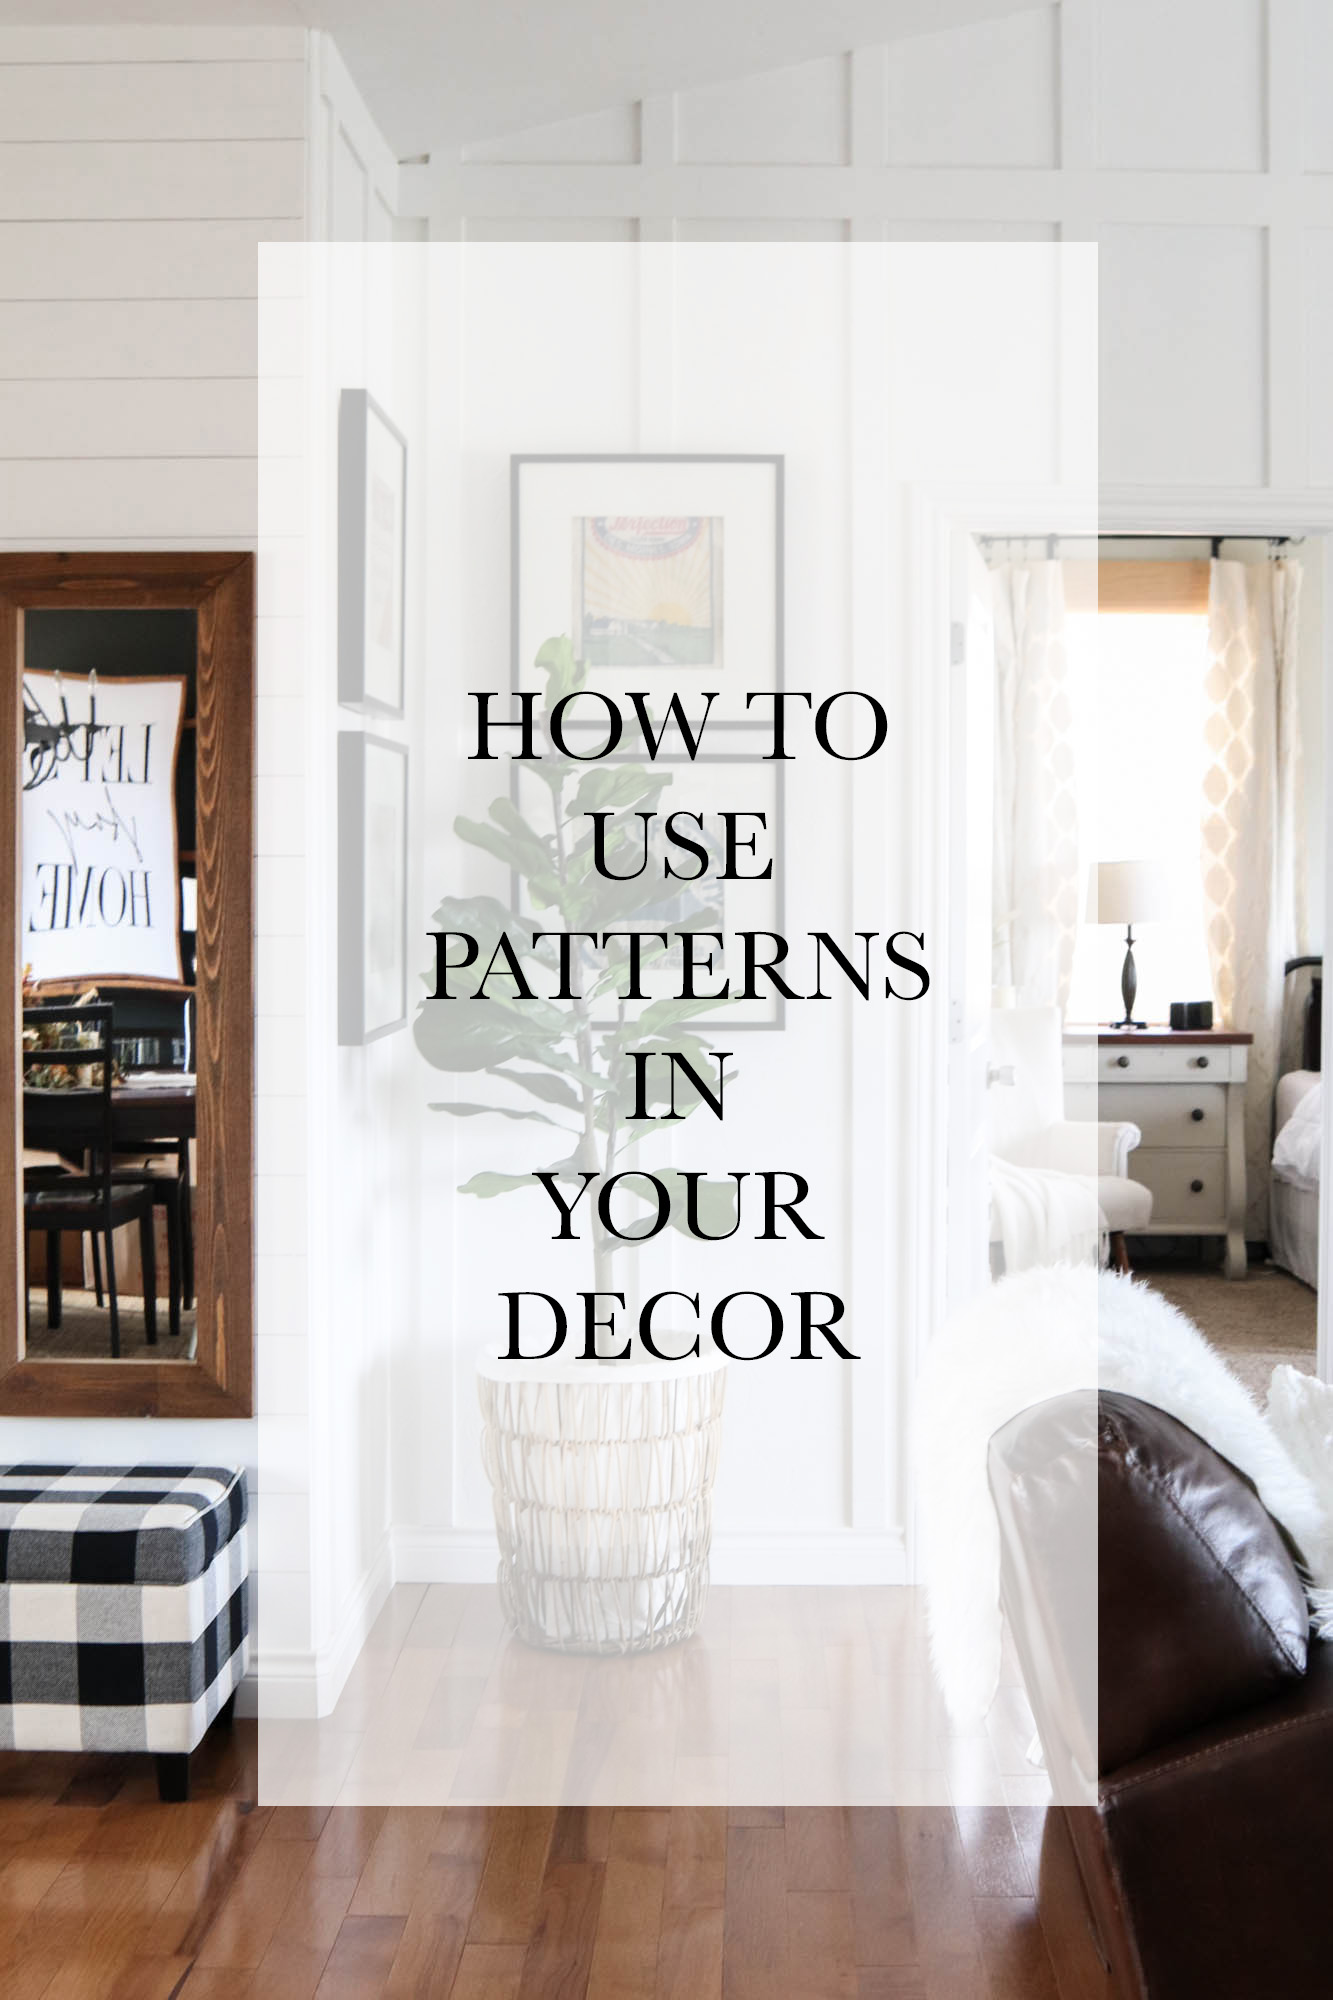 How To Use Patterns In Home Decor by The Wood Grain Cottage